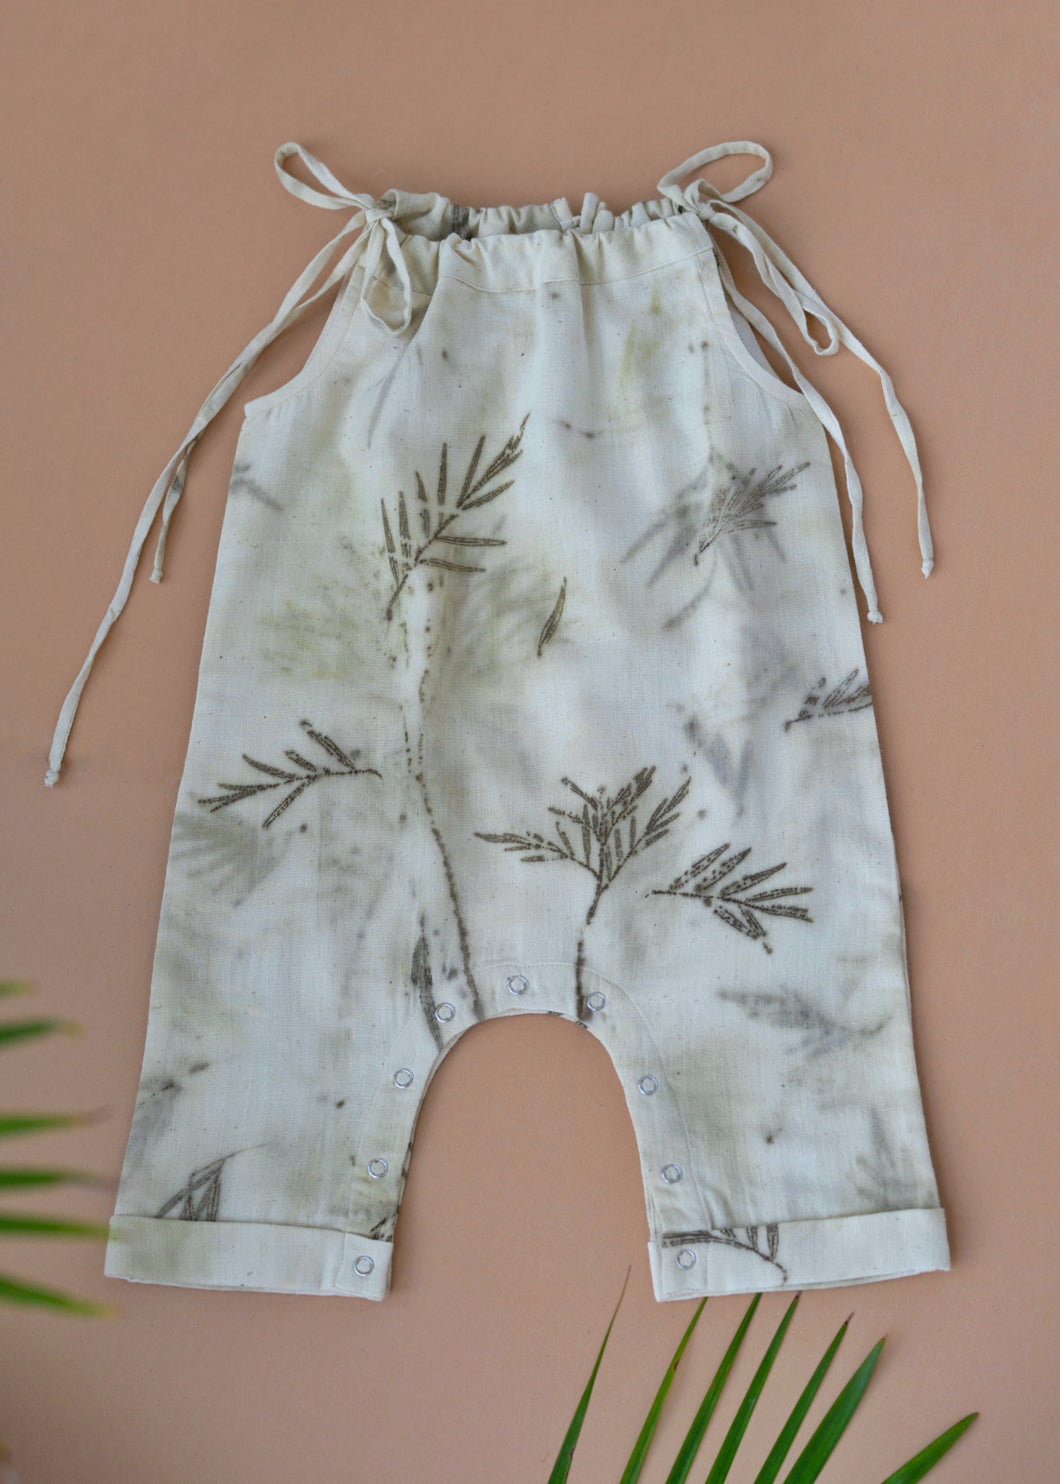 An organic cotton jumpsuit eco-printed with silver oak leaves with some leaves aside.